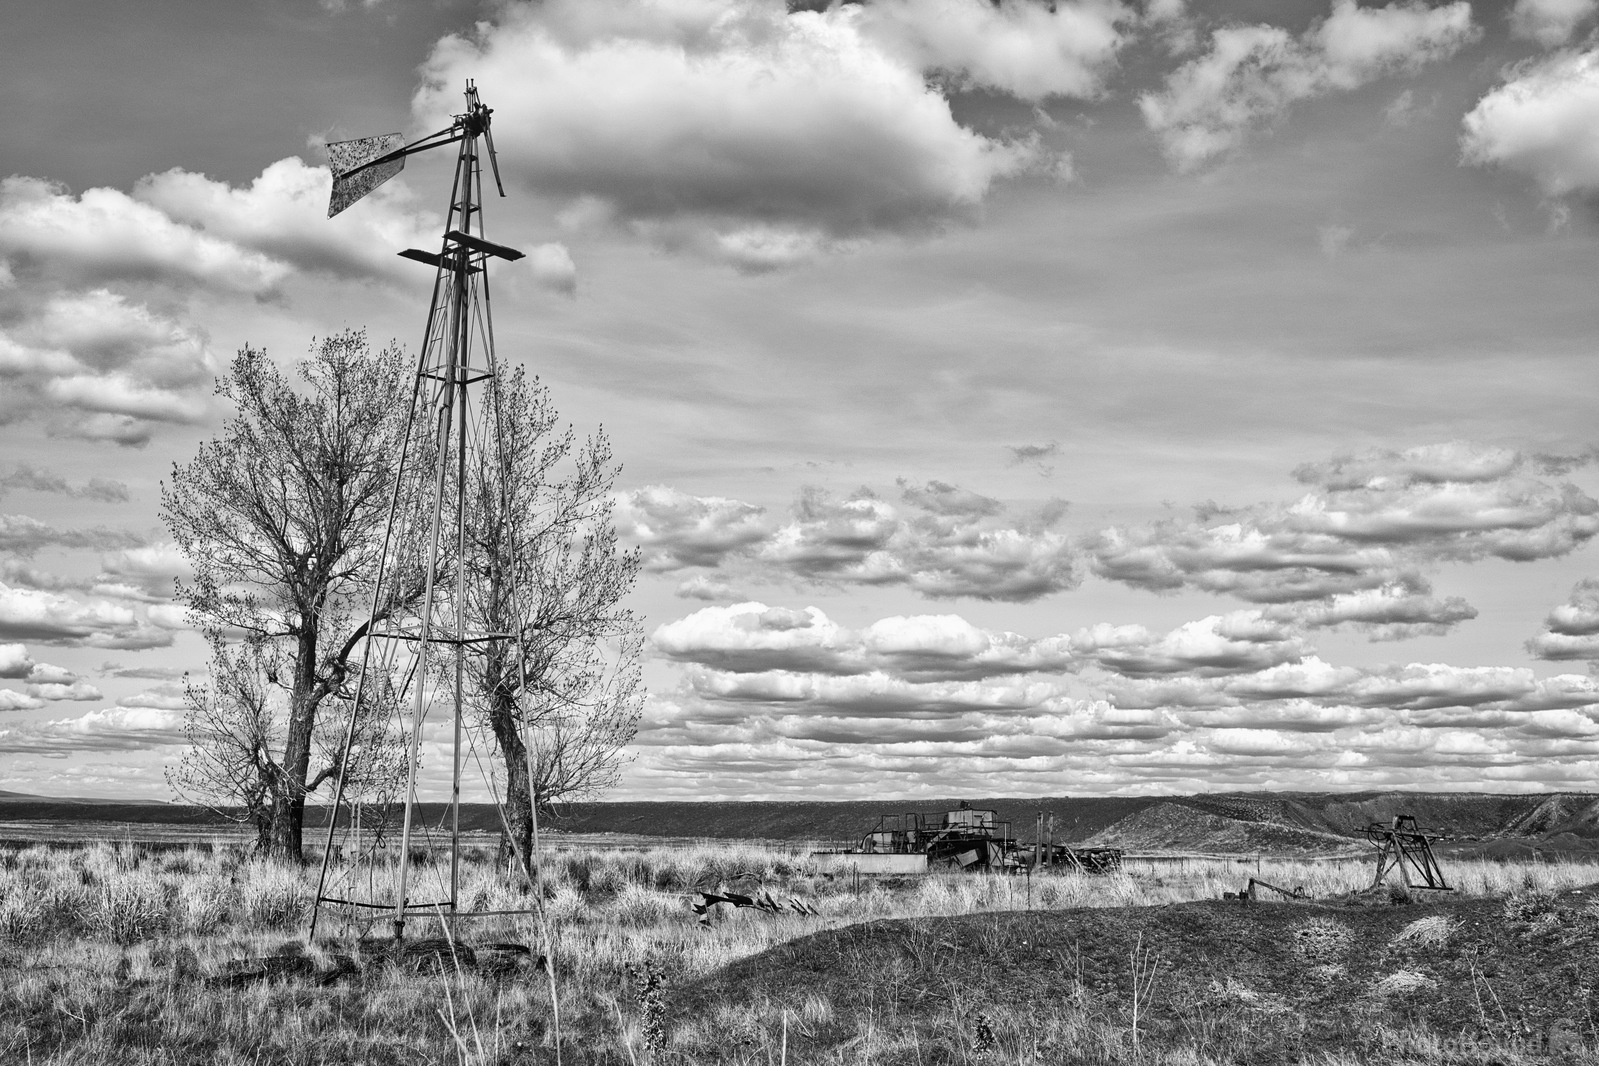 Image of Old Farm Implement and Windmill Frame by Steve West